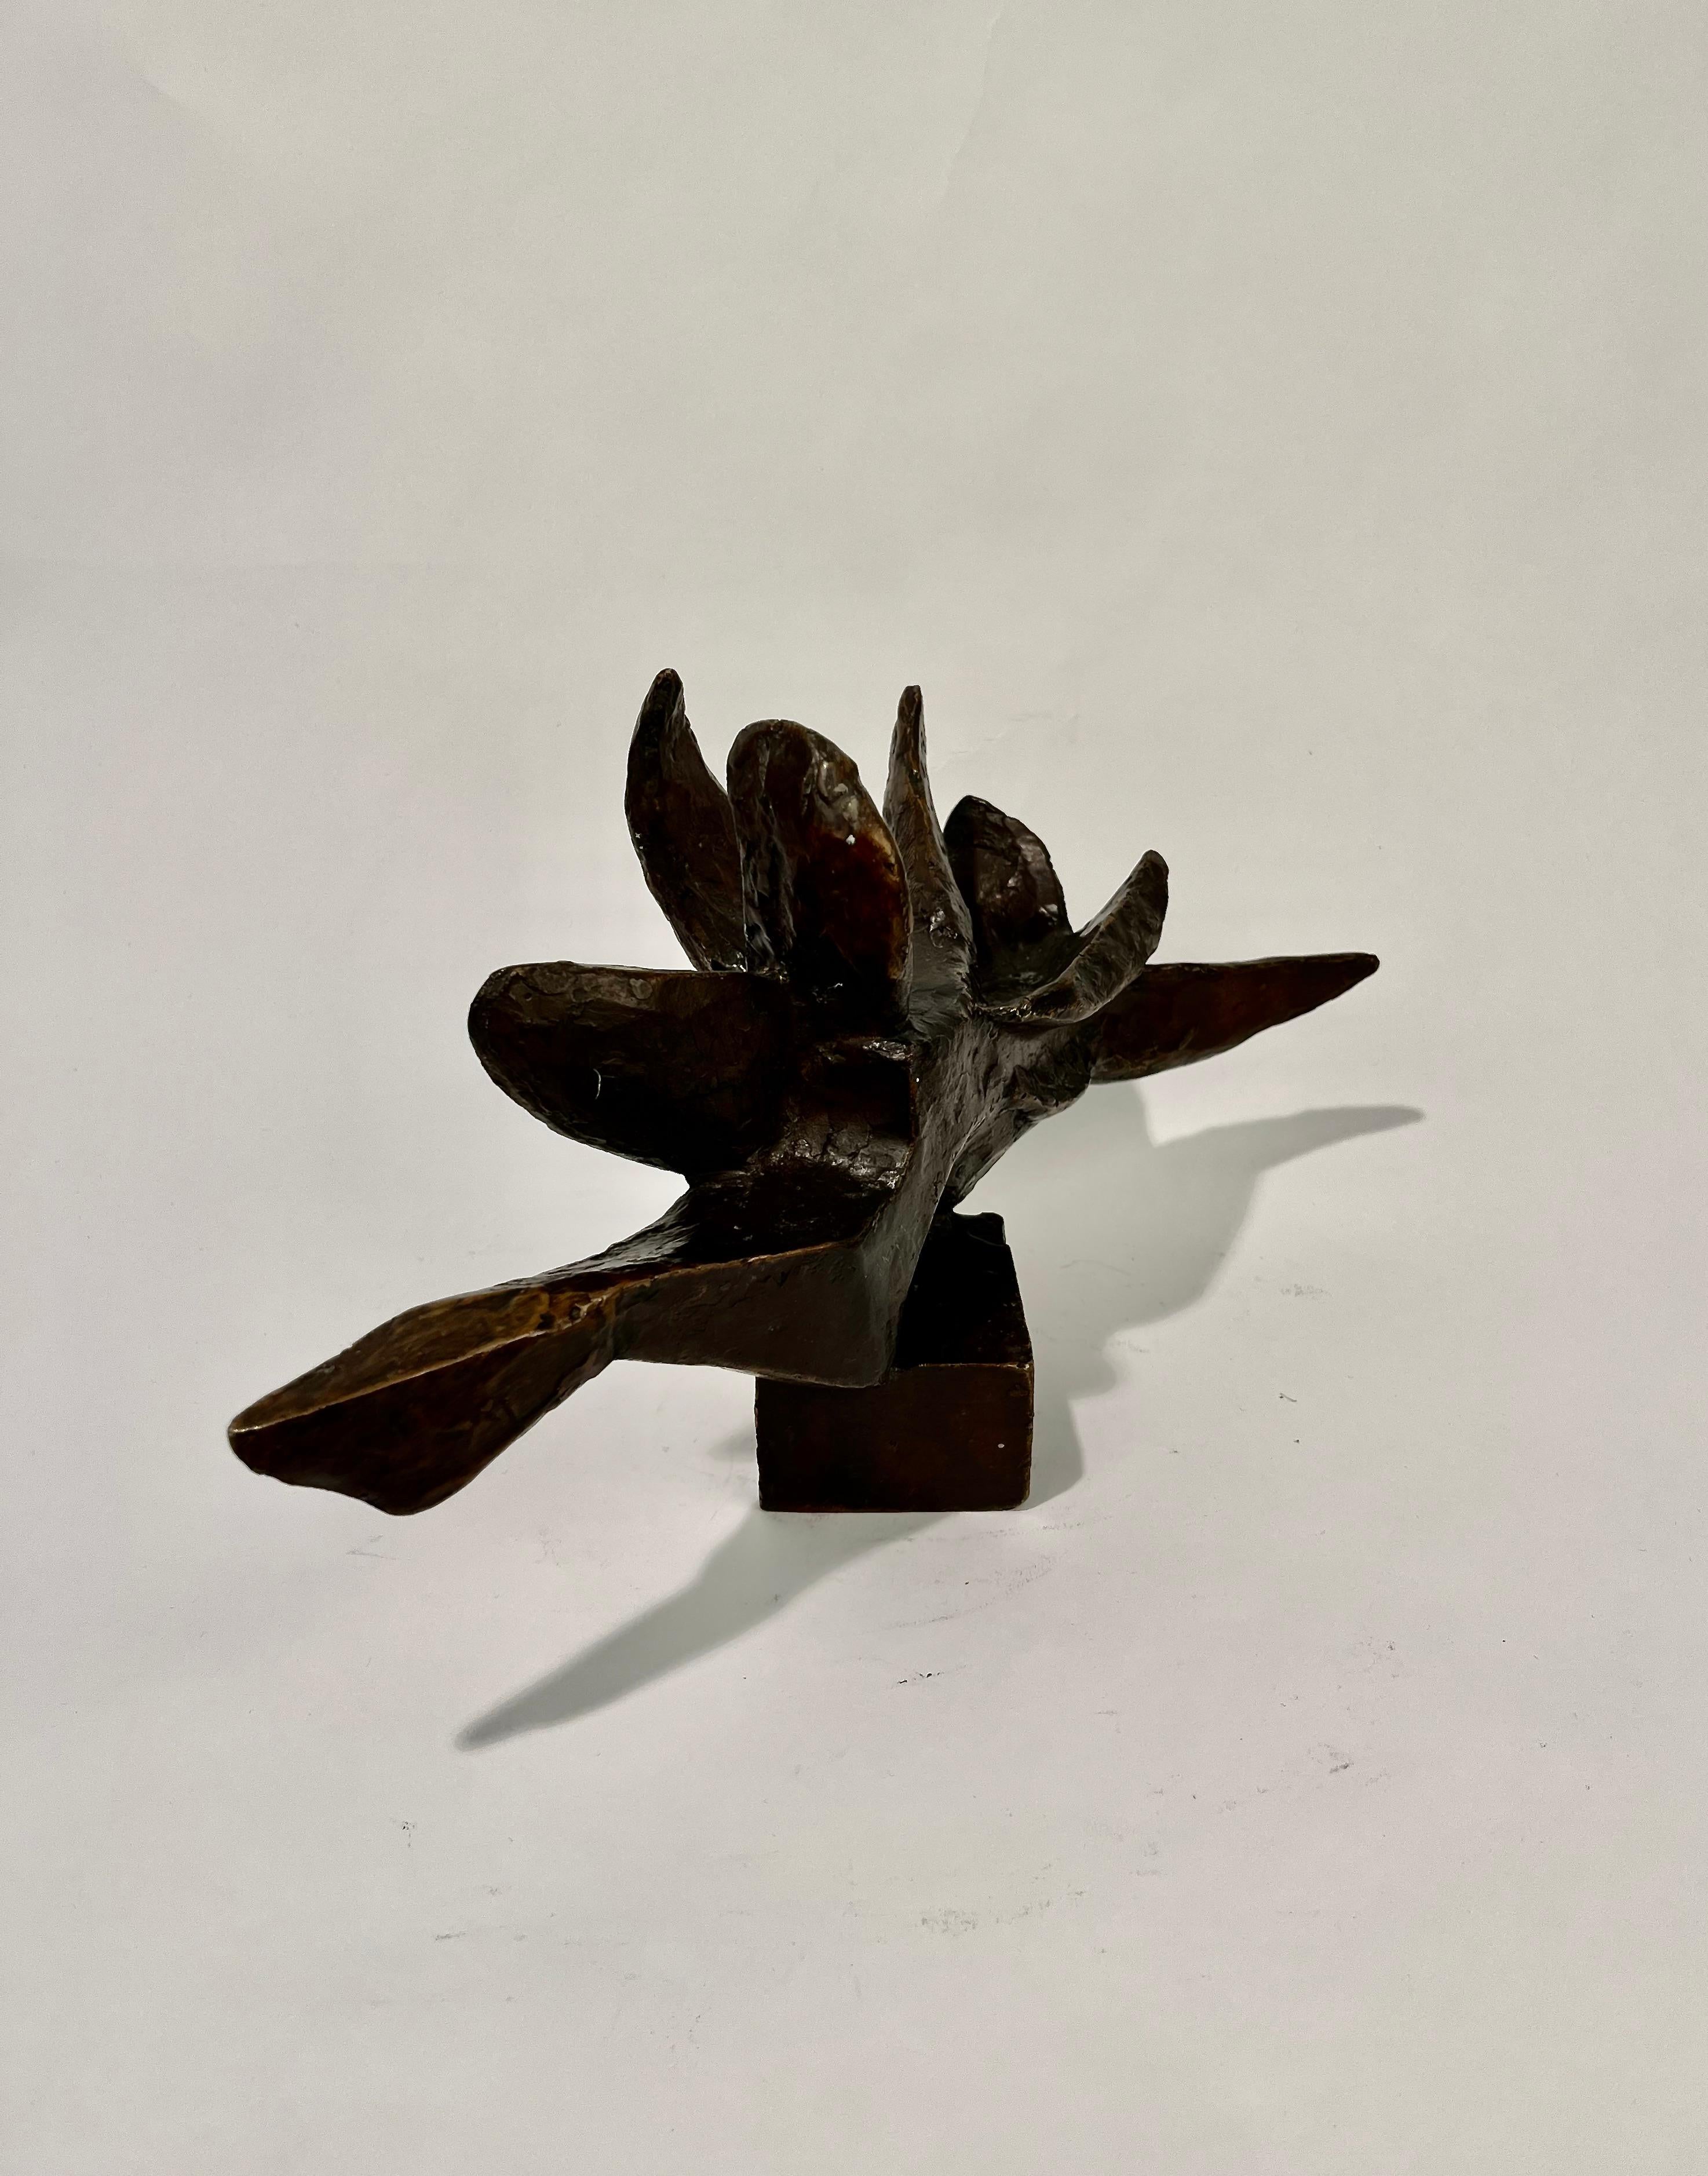 An abstract sculpture in bronze made by Knut Erik Lindberg. Signed and made in 1968.

Knut Erik Lindberg was a conscious bearer of the classical sculpture tradition, while at the same time he was full of humor and humanity.

Education: Technical